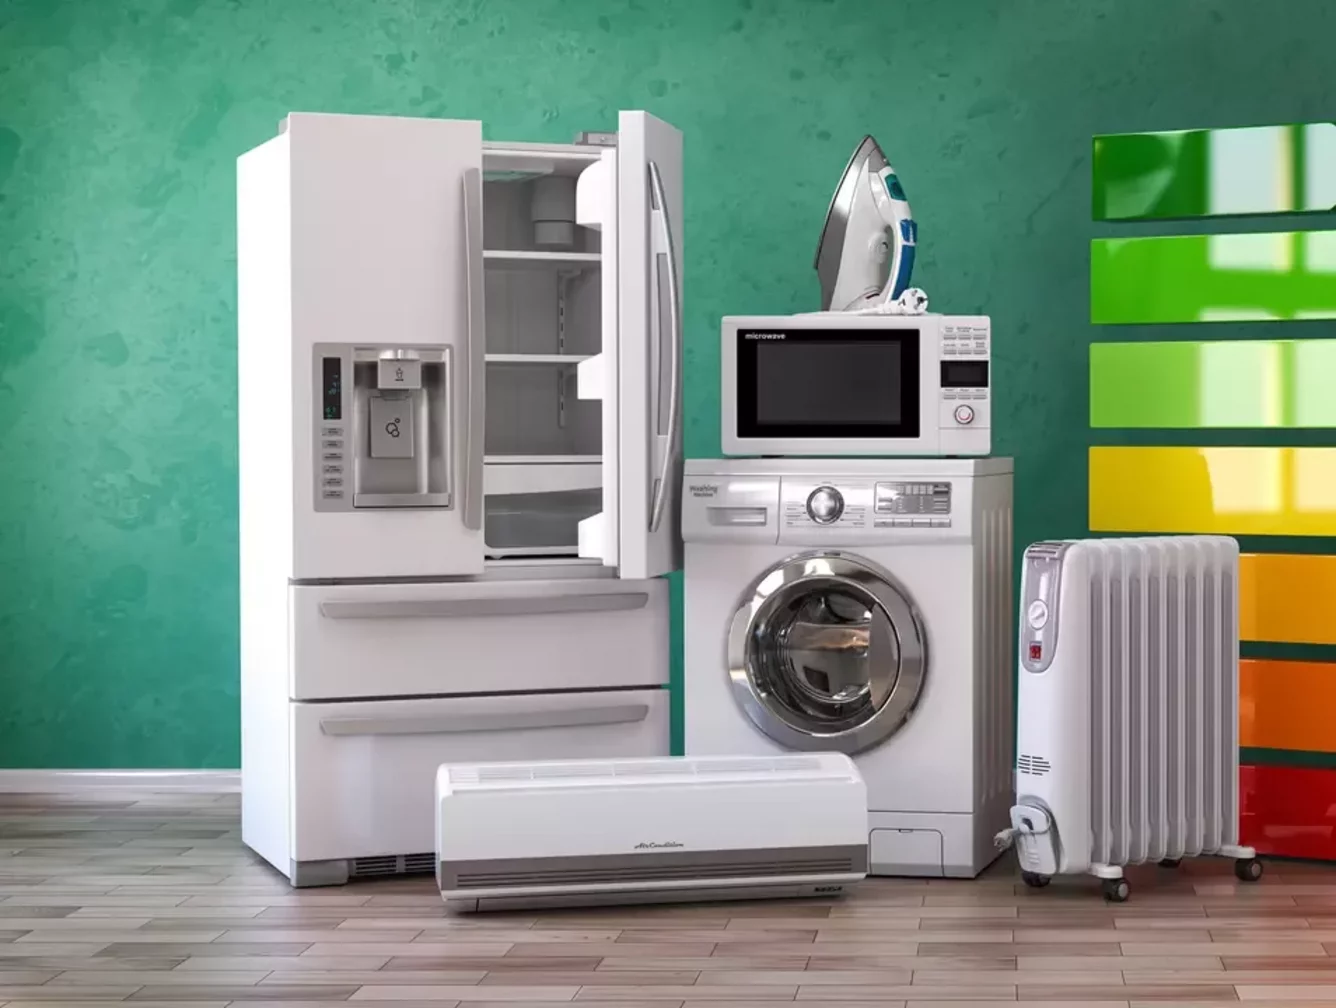 “Efficiency Matters: How Energy-Efficient Appliances Can Save You Money”